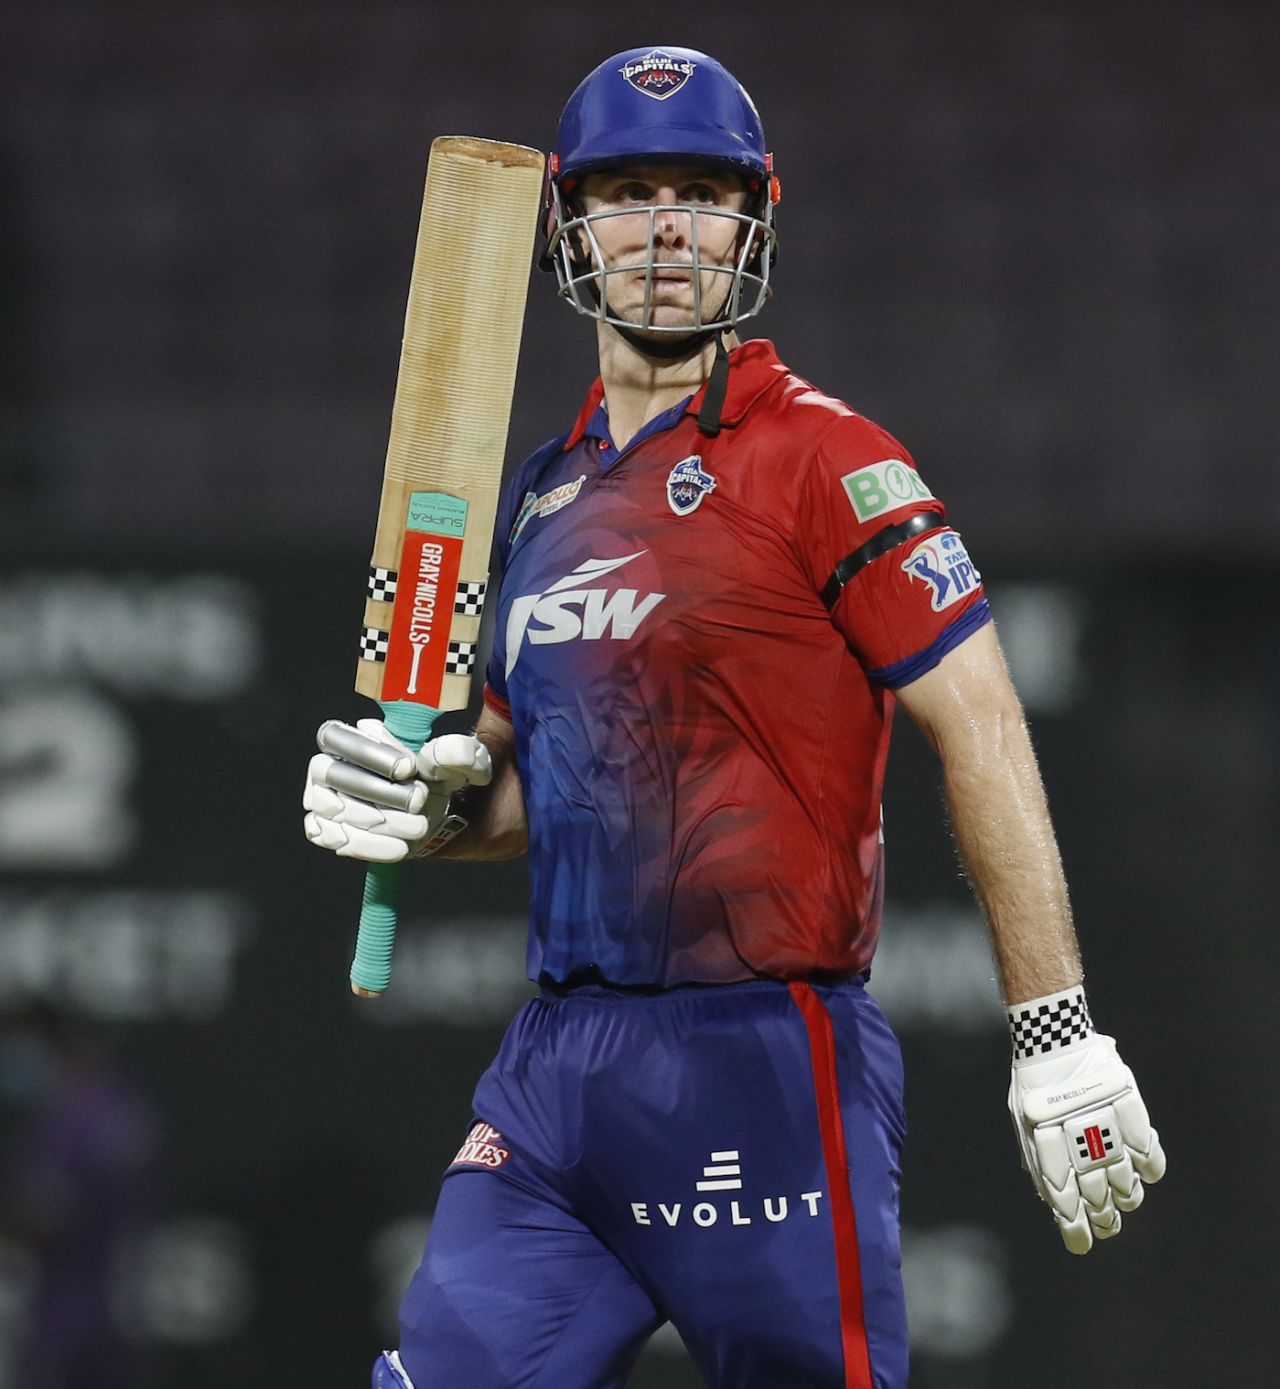 Mitchell Marsh started quickly, then slowed down, got to a fifty, and then picked up speed again, Delhi Capitals vs Punjab Kings, IPL 2022, DY Patil Stadium, Mumbai, May 16, 2022